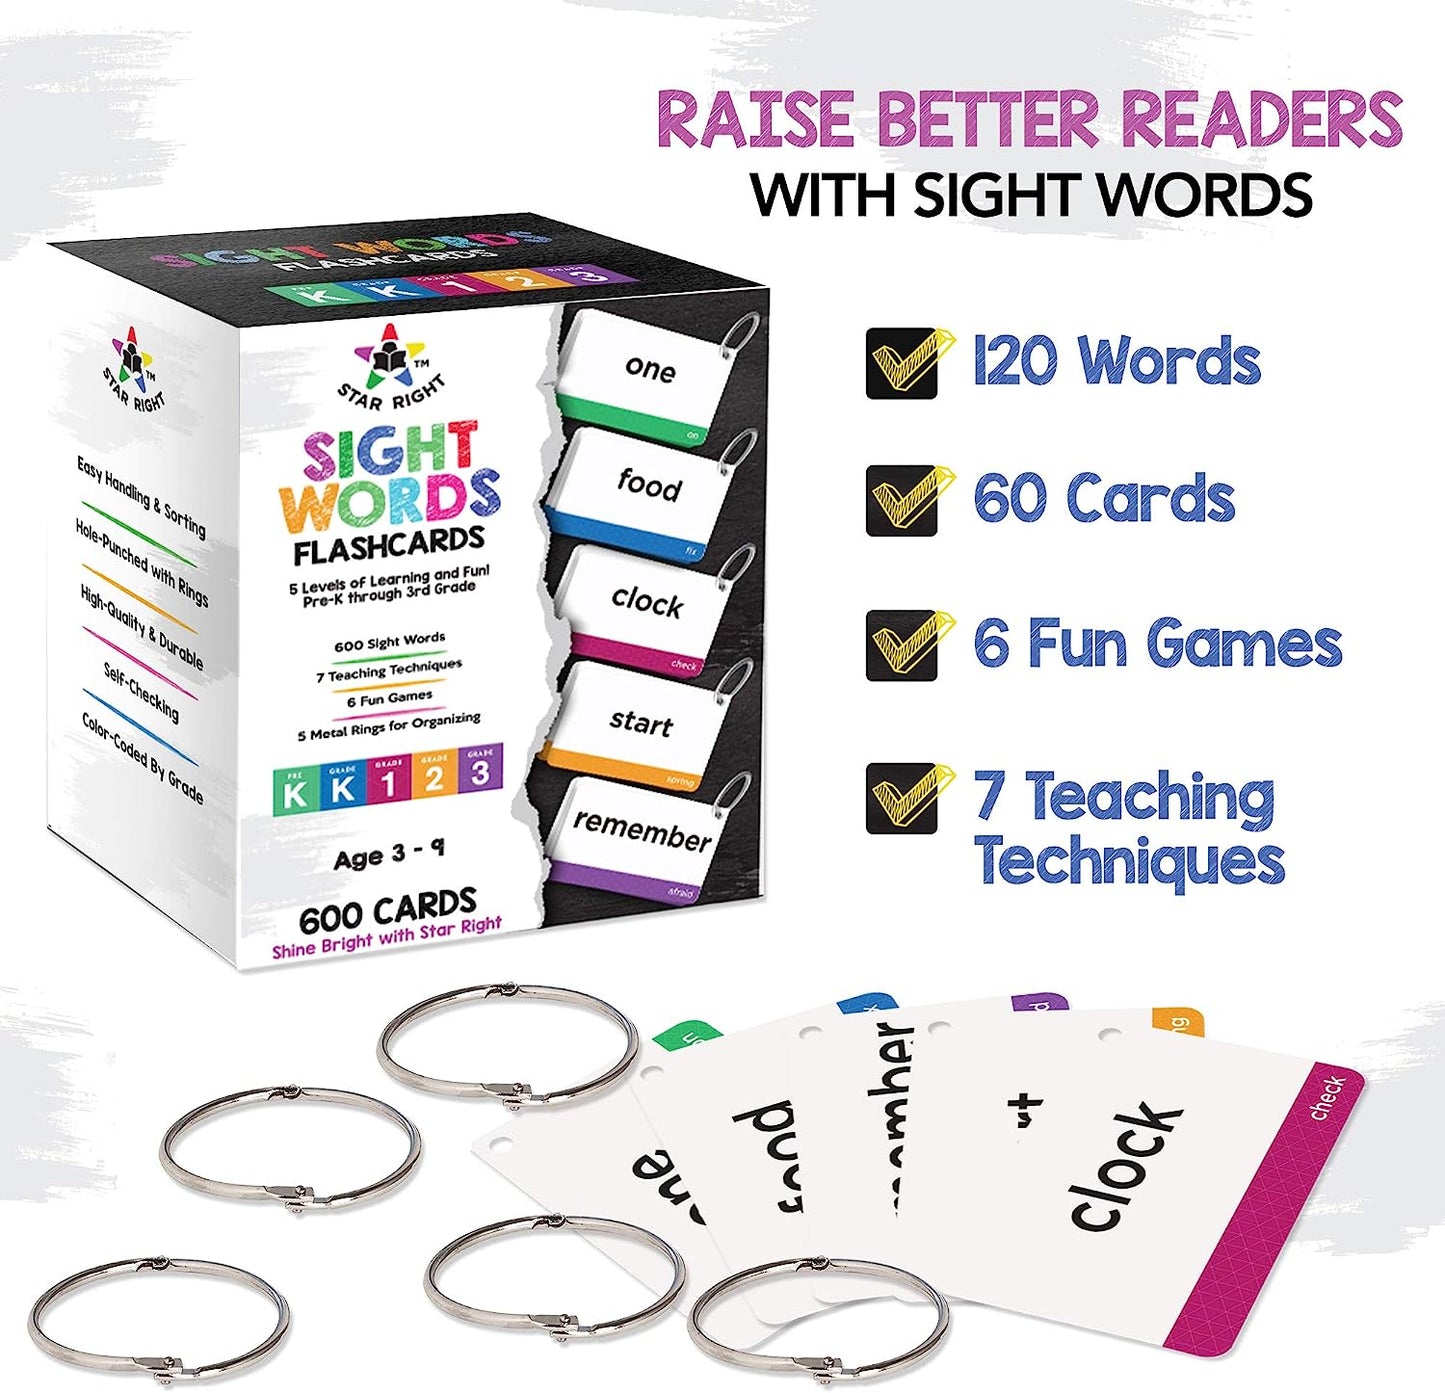 600 Sight Words Flash Cards & Flashcard Games Set - 300 Hole Punched Flash Cards - 30 Fun Flashcard Games - 5 Binder Rings - for Ages 3 & Up - Pre-K, Kindergarten, 1st, 2nd, & 3rd Grade